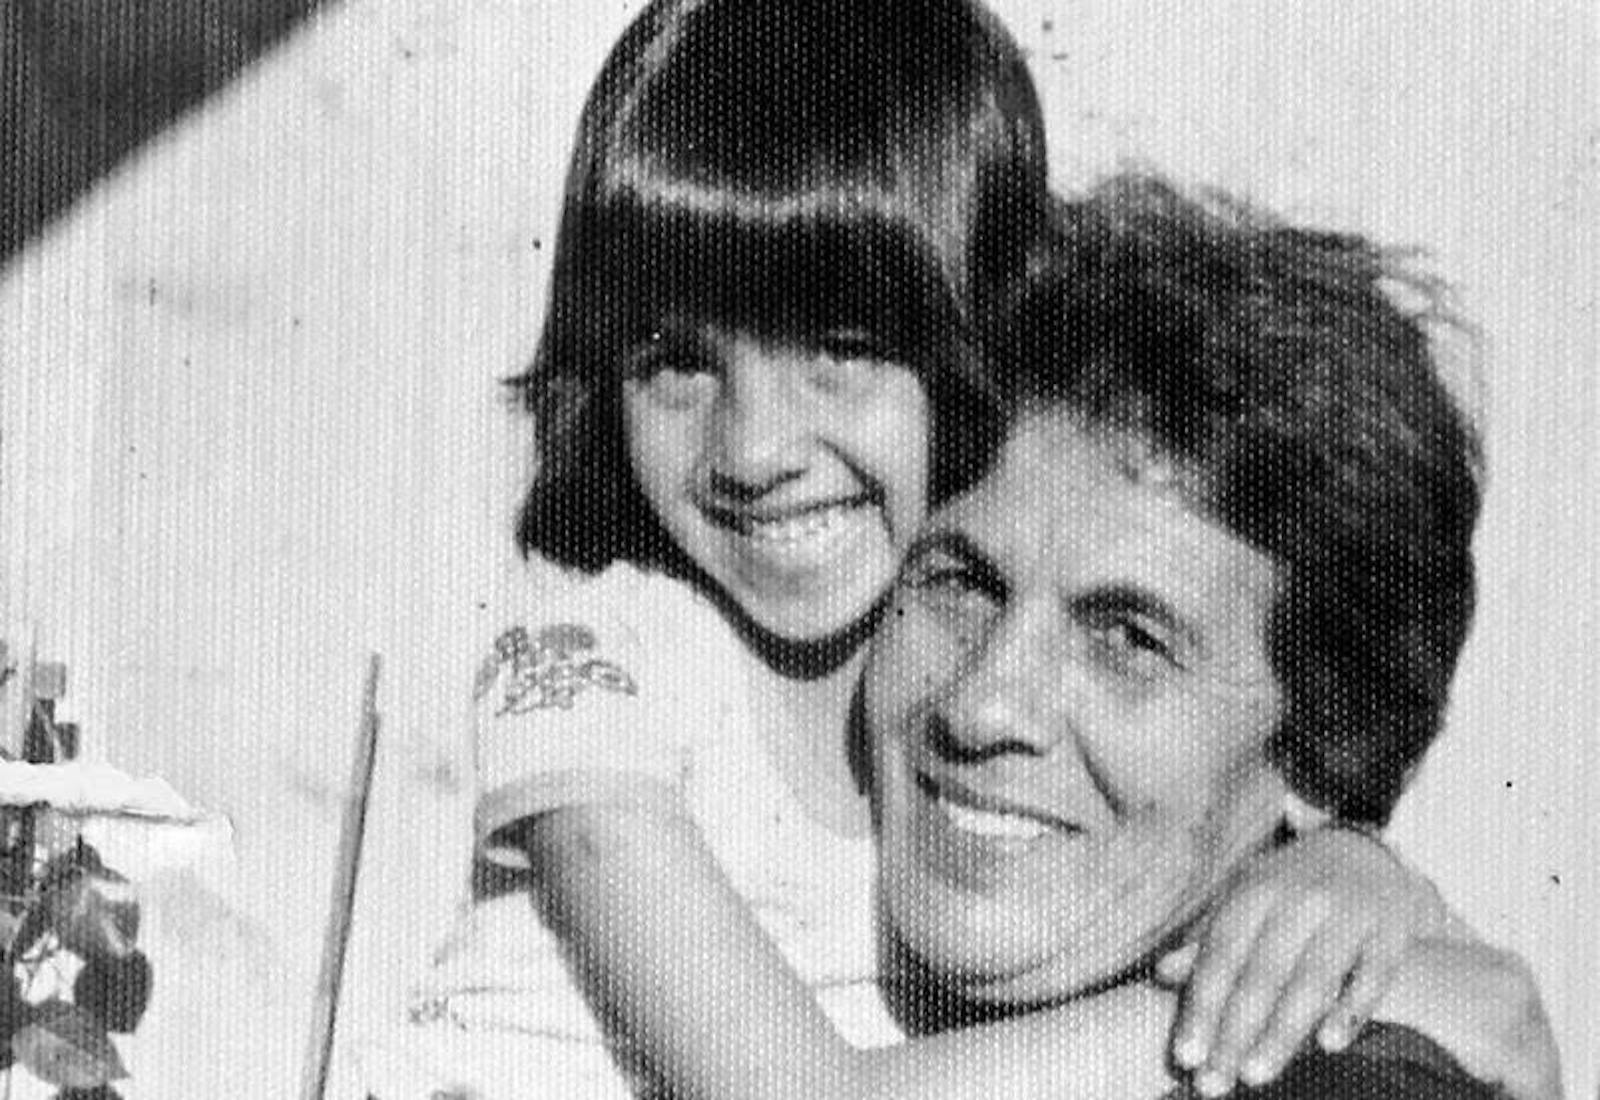 Sigi (age 6) and her grandmother Aliza Kostika, taken on the balcony of her house.